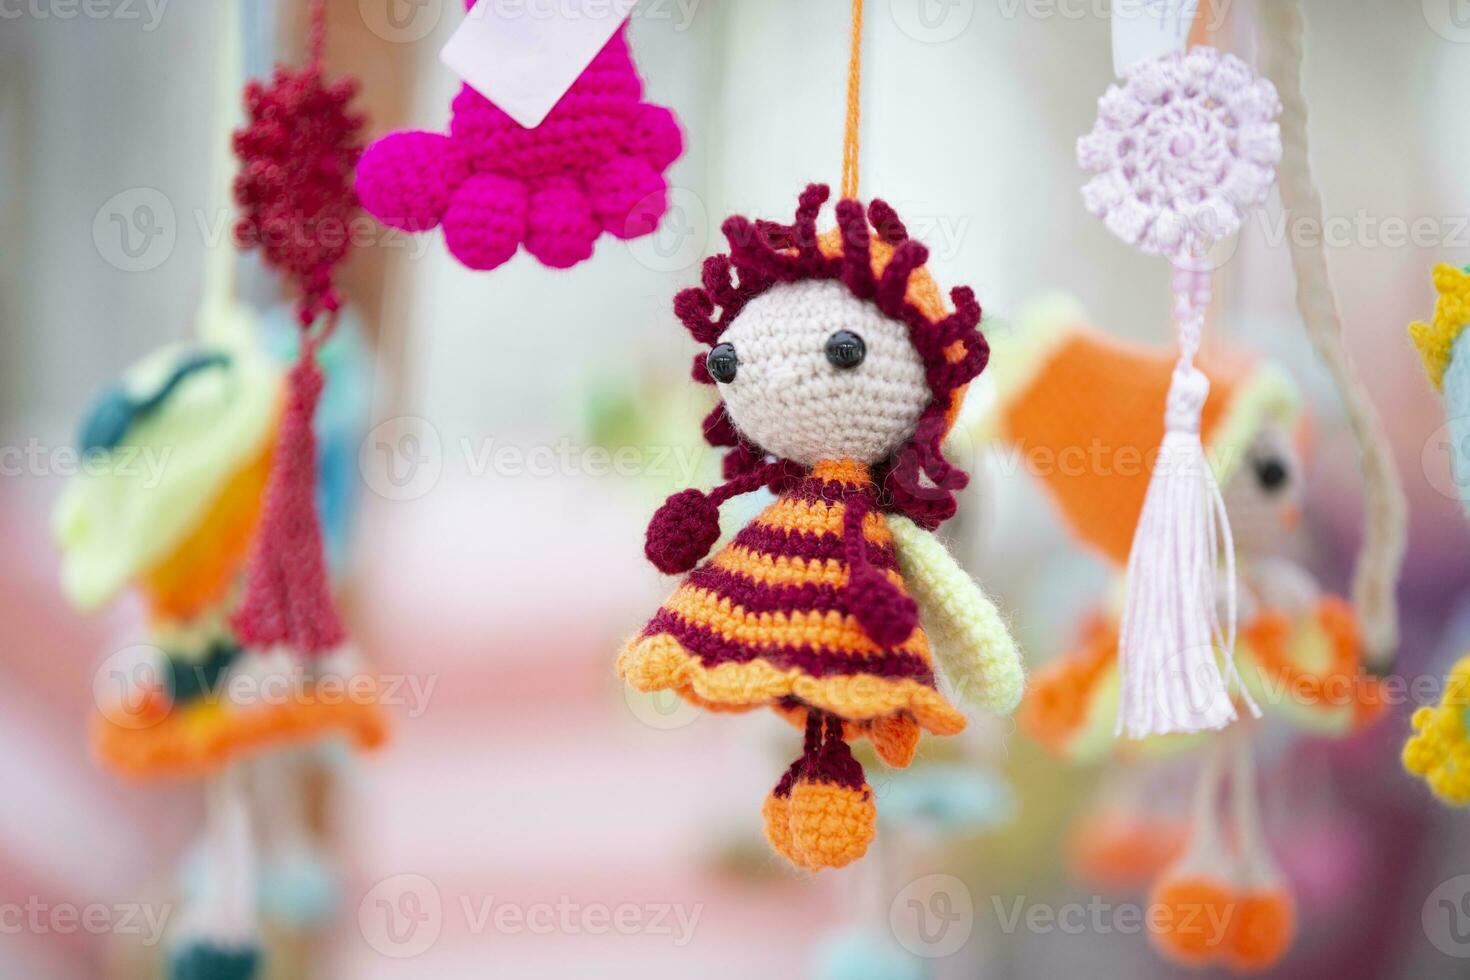 Small funny handmade knitted dolls are for sale at the craft fair. photo